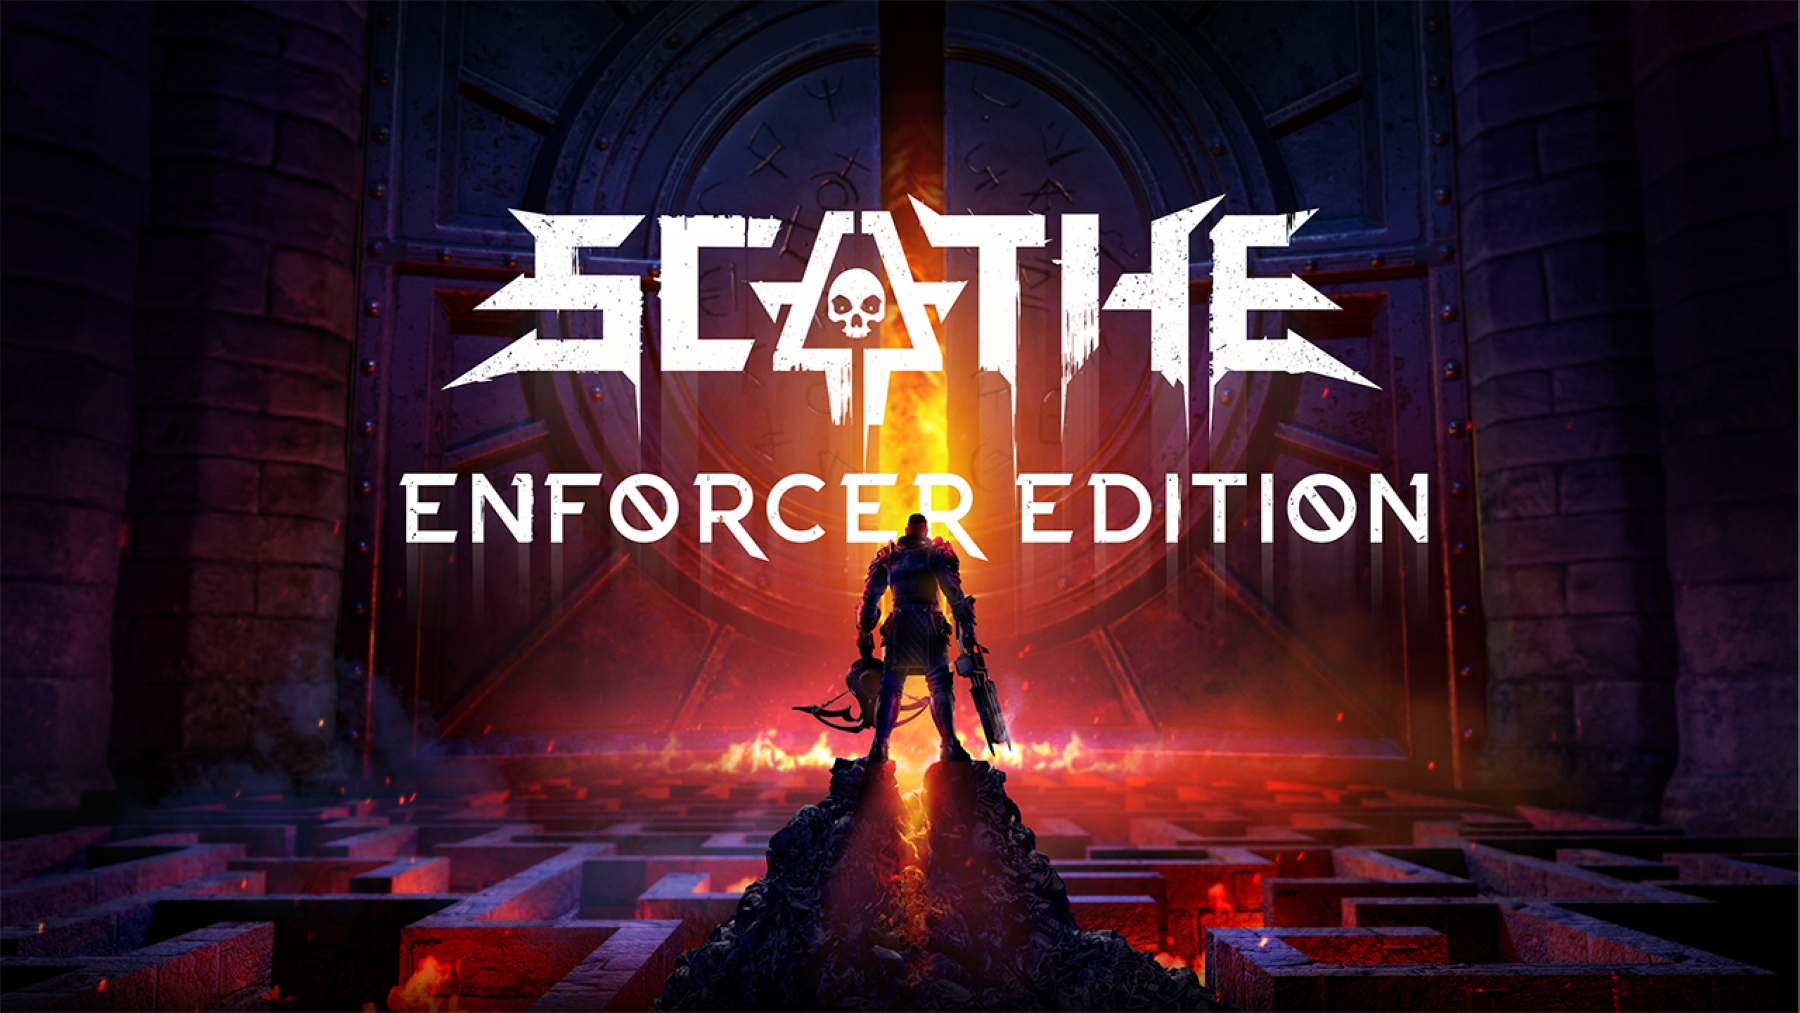 Scathe: Enforcer Edition launches with new modes, gameplay modifiers, and other improvements